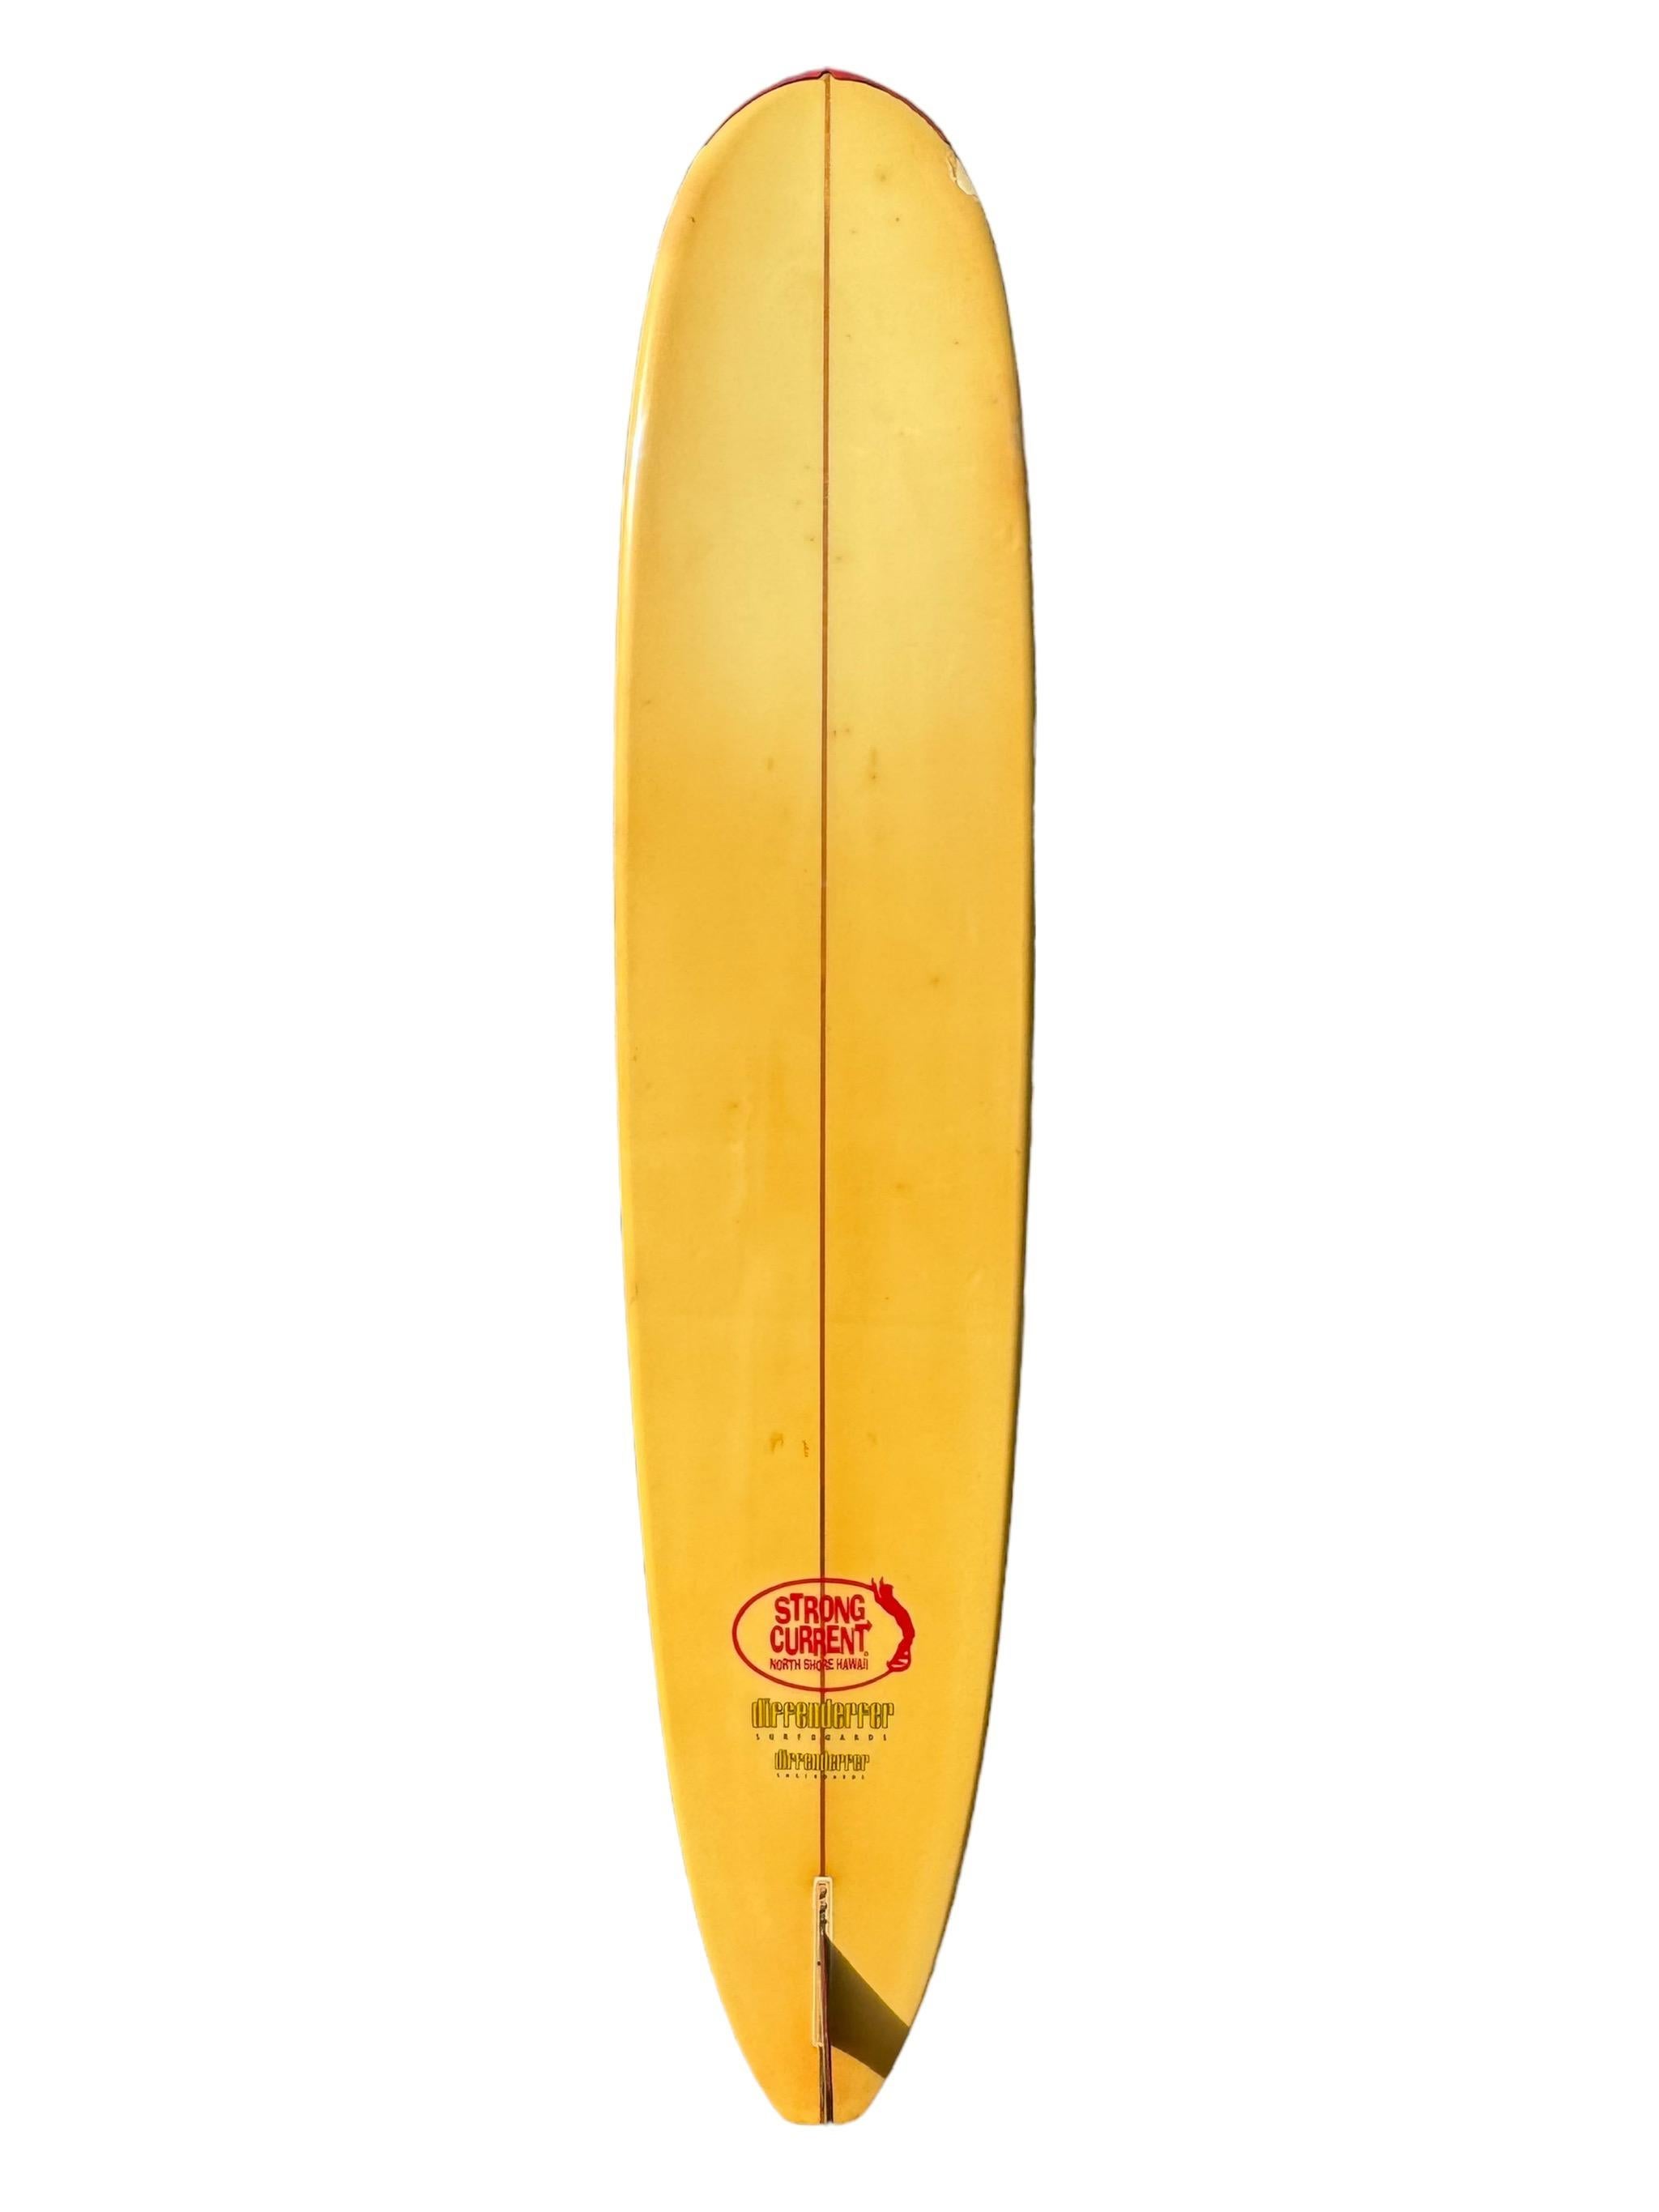 1995 Vintage Diffenderfer Strong Current longboard shaped by the late Mike Diffenderfer (1937-2002). Features beautiful floral work of art. Hand signed on redwood stringer by the surfboard design pioneer, Mike Diffenderfer . A remarkable example of